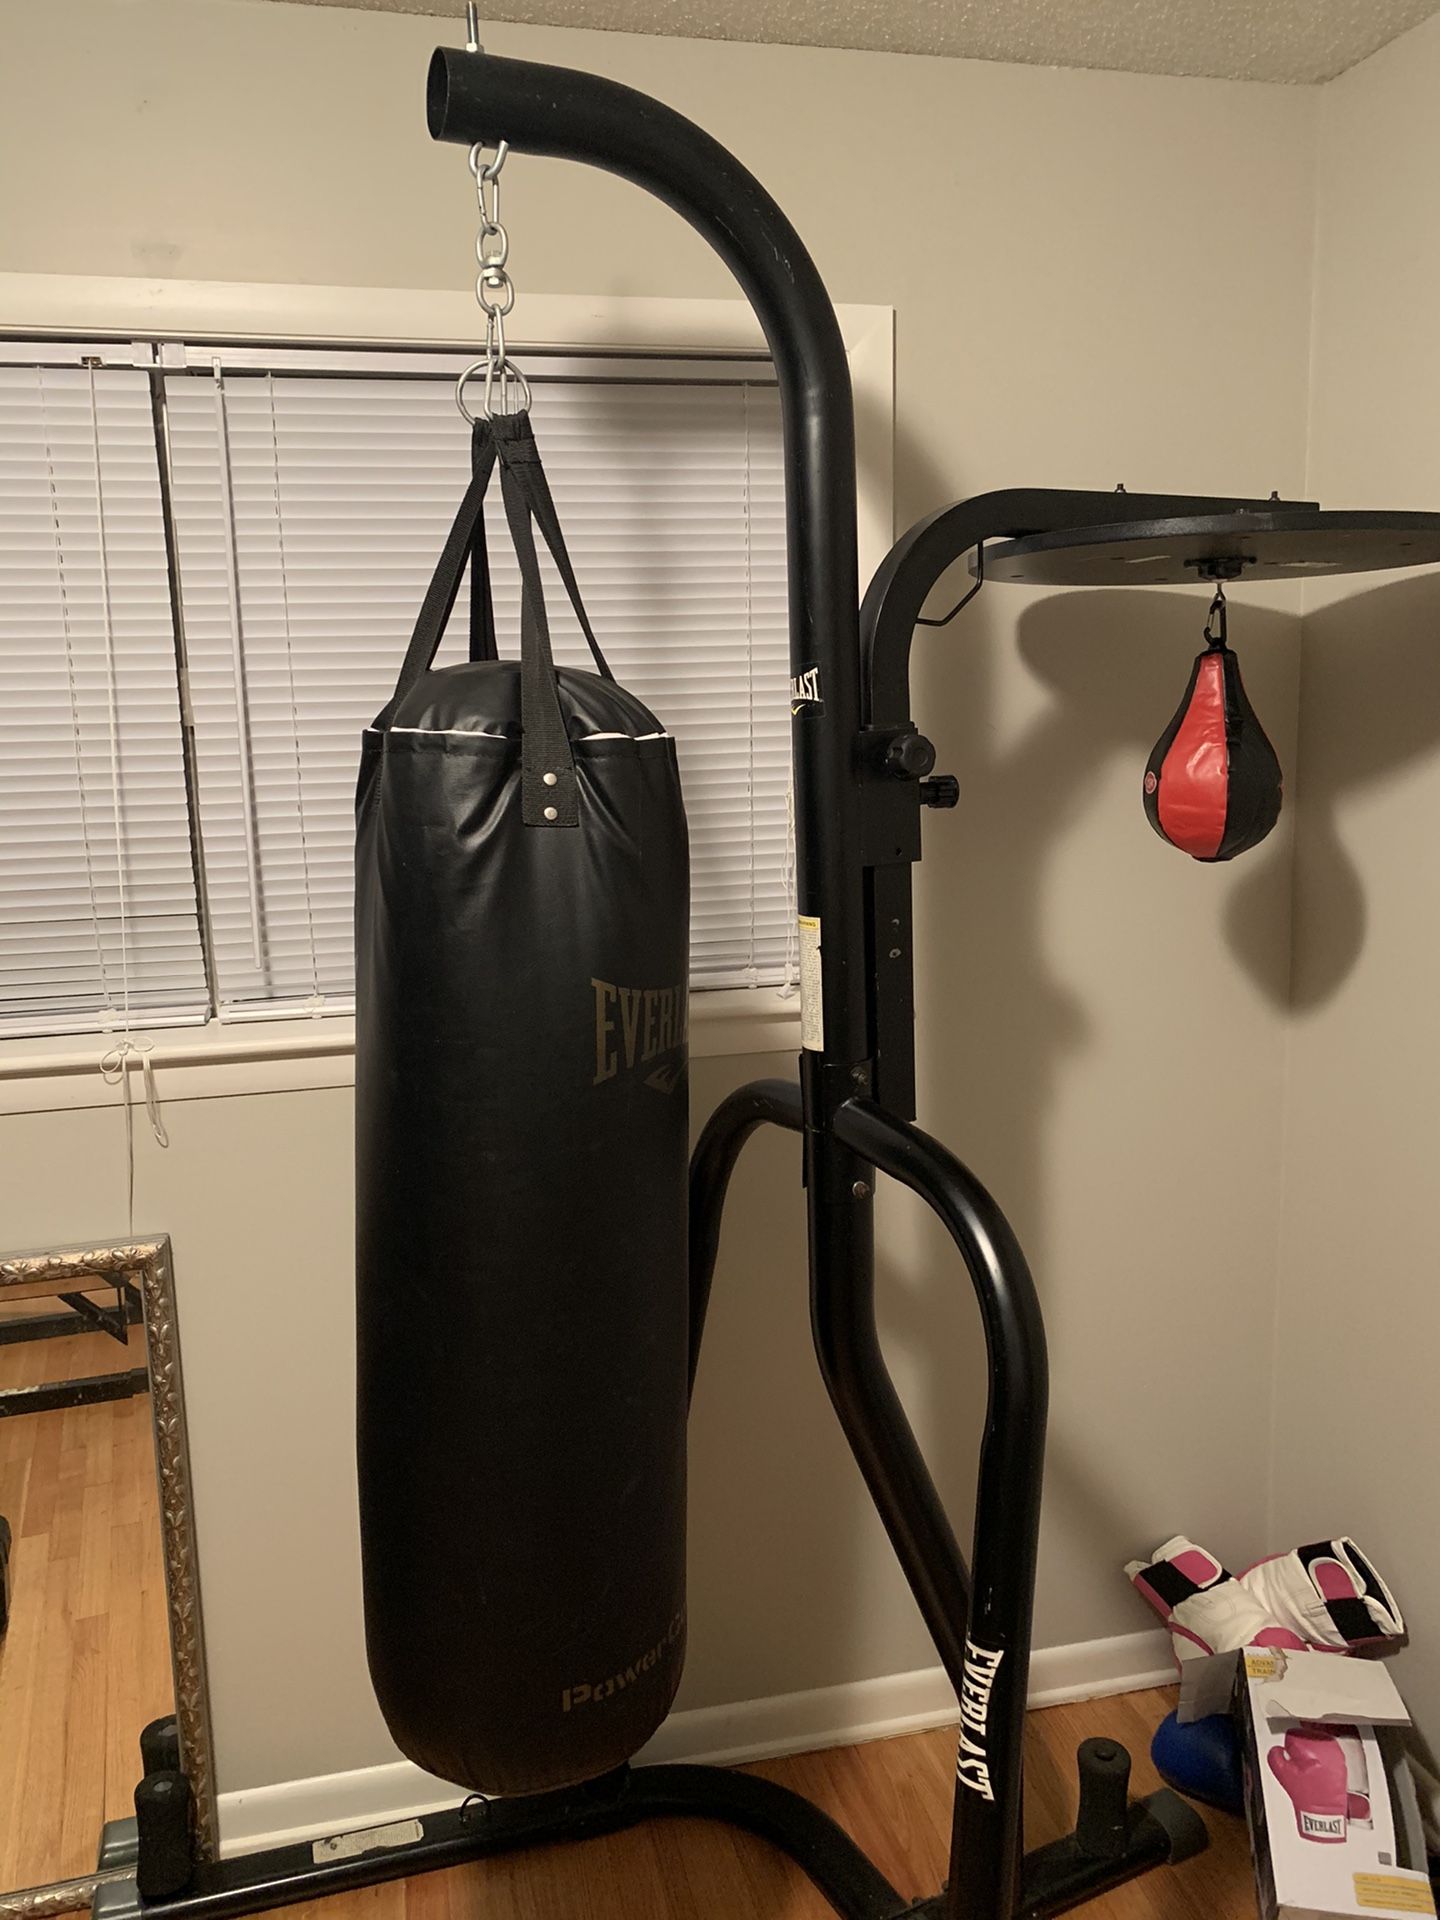 Punching bag set (SERIOUS BUYERS ONLY PLEASE)